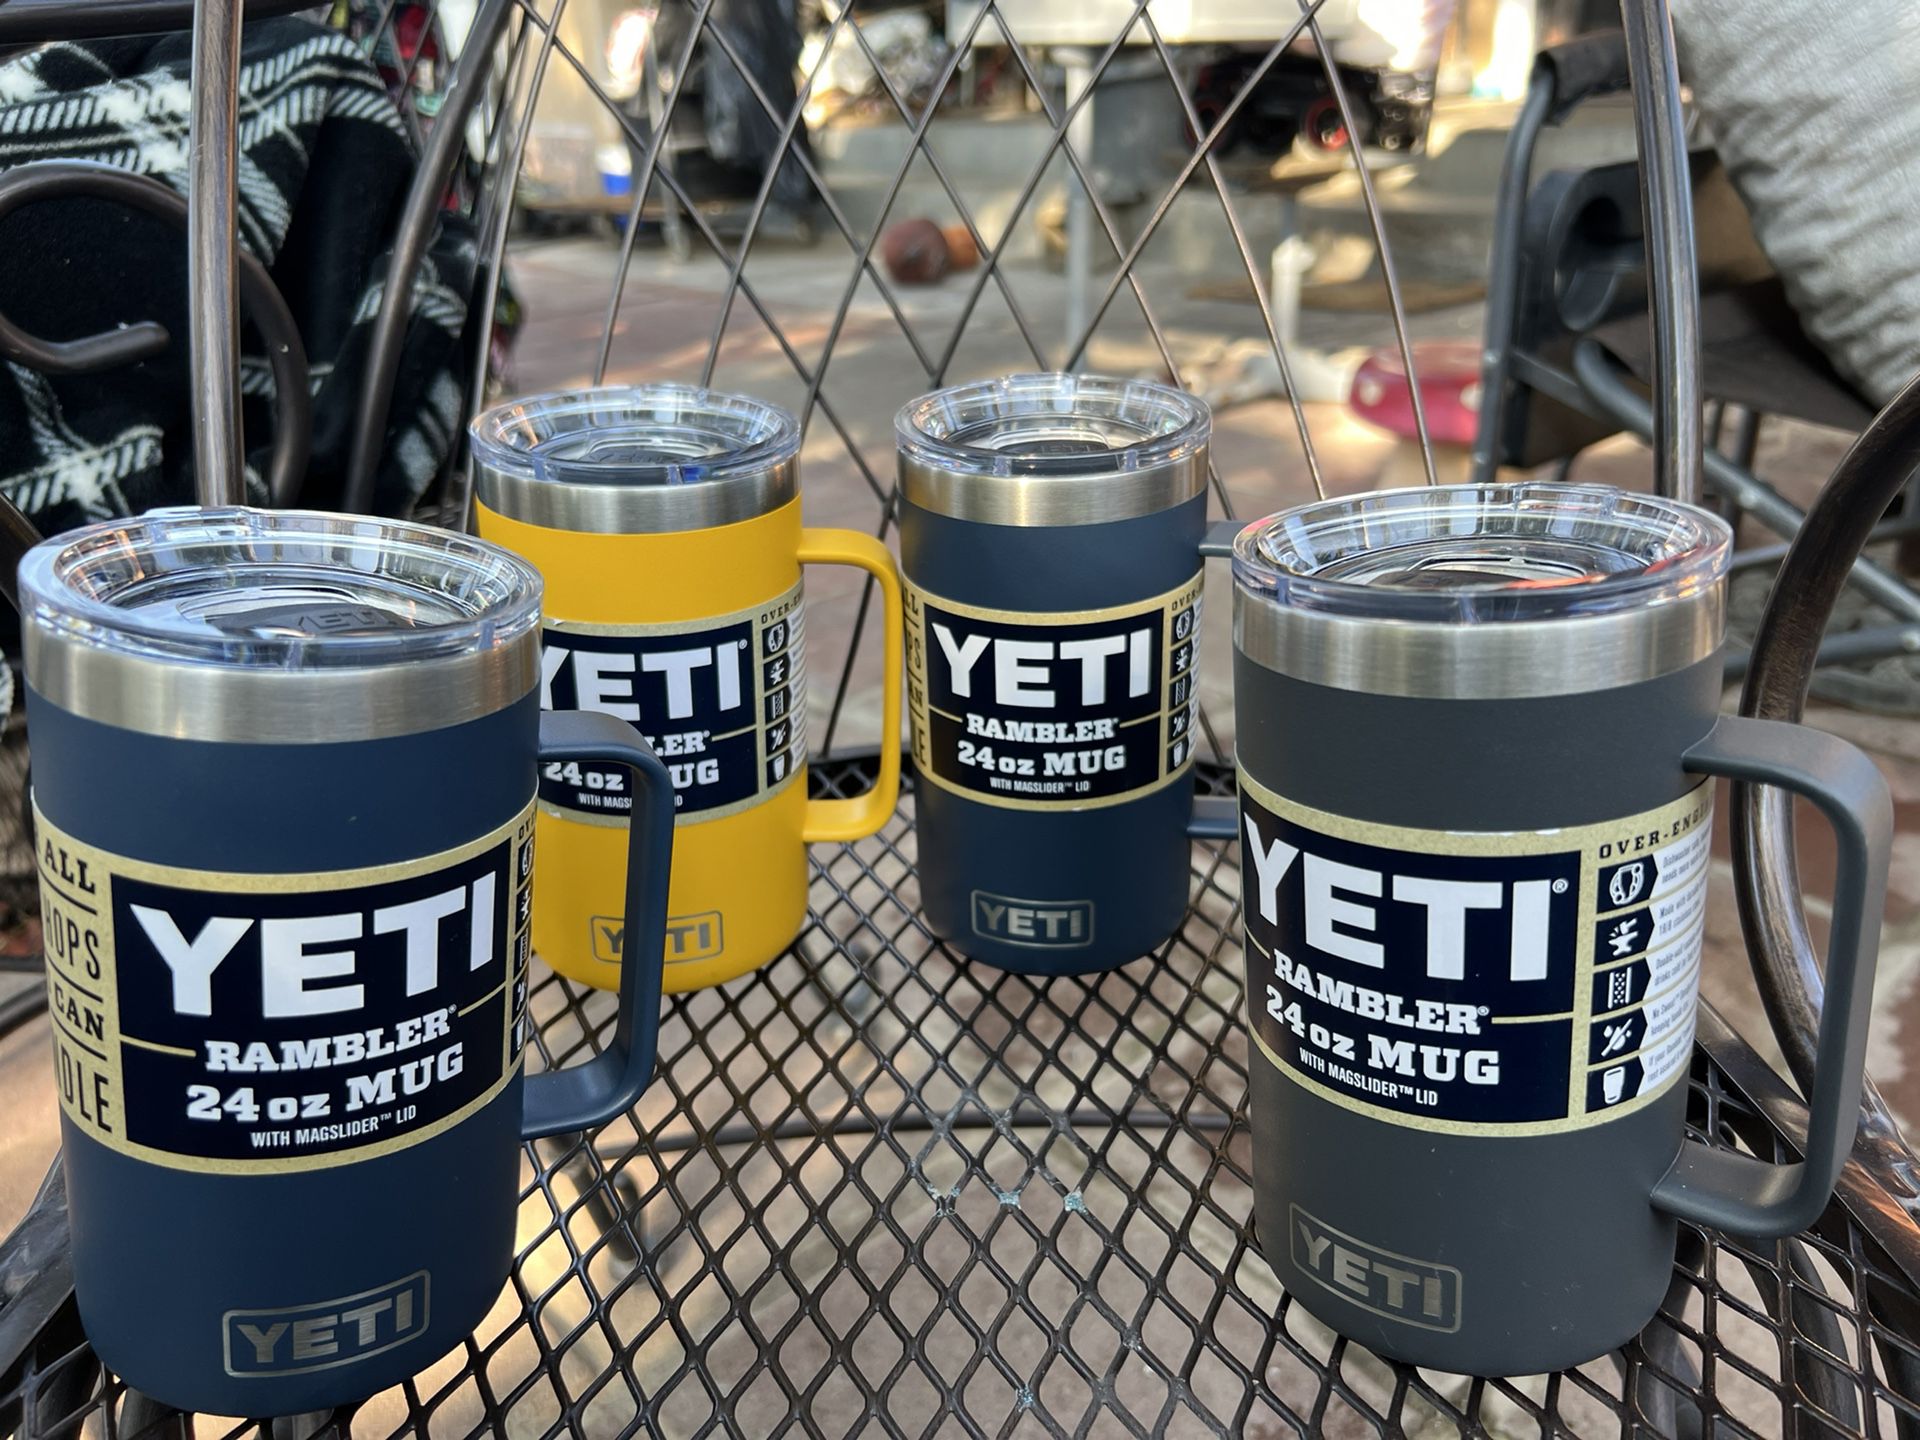 YETI ICE PINK LIMITED EDITION 24oz MUG for Sale in Corona, CA - OfferUp